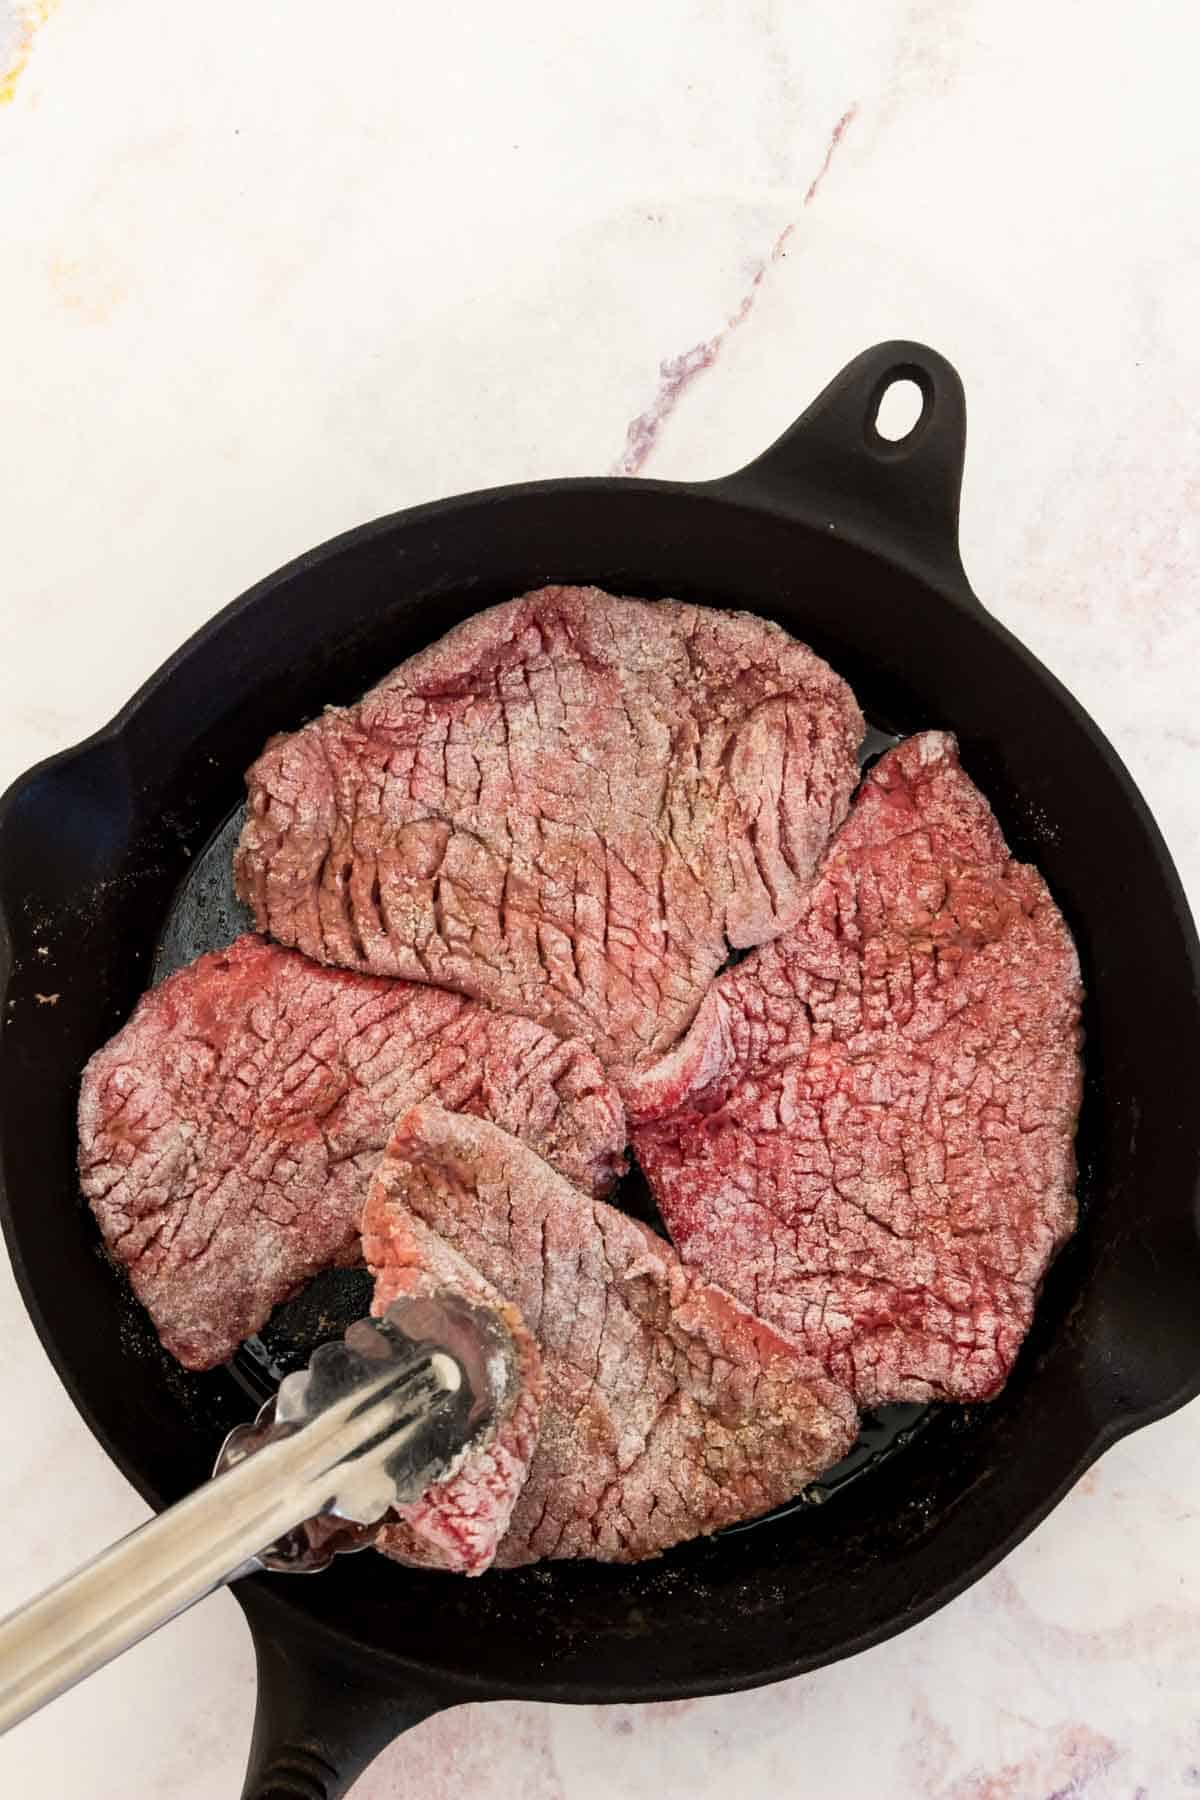 Tongs are used to flip one cube steak out of four that are searing in a cast iron skillet.